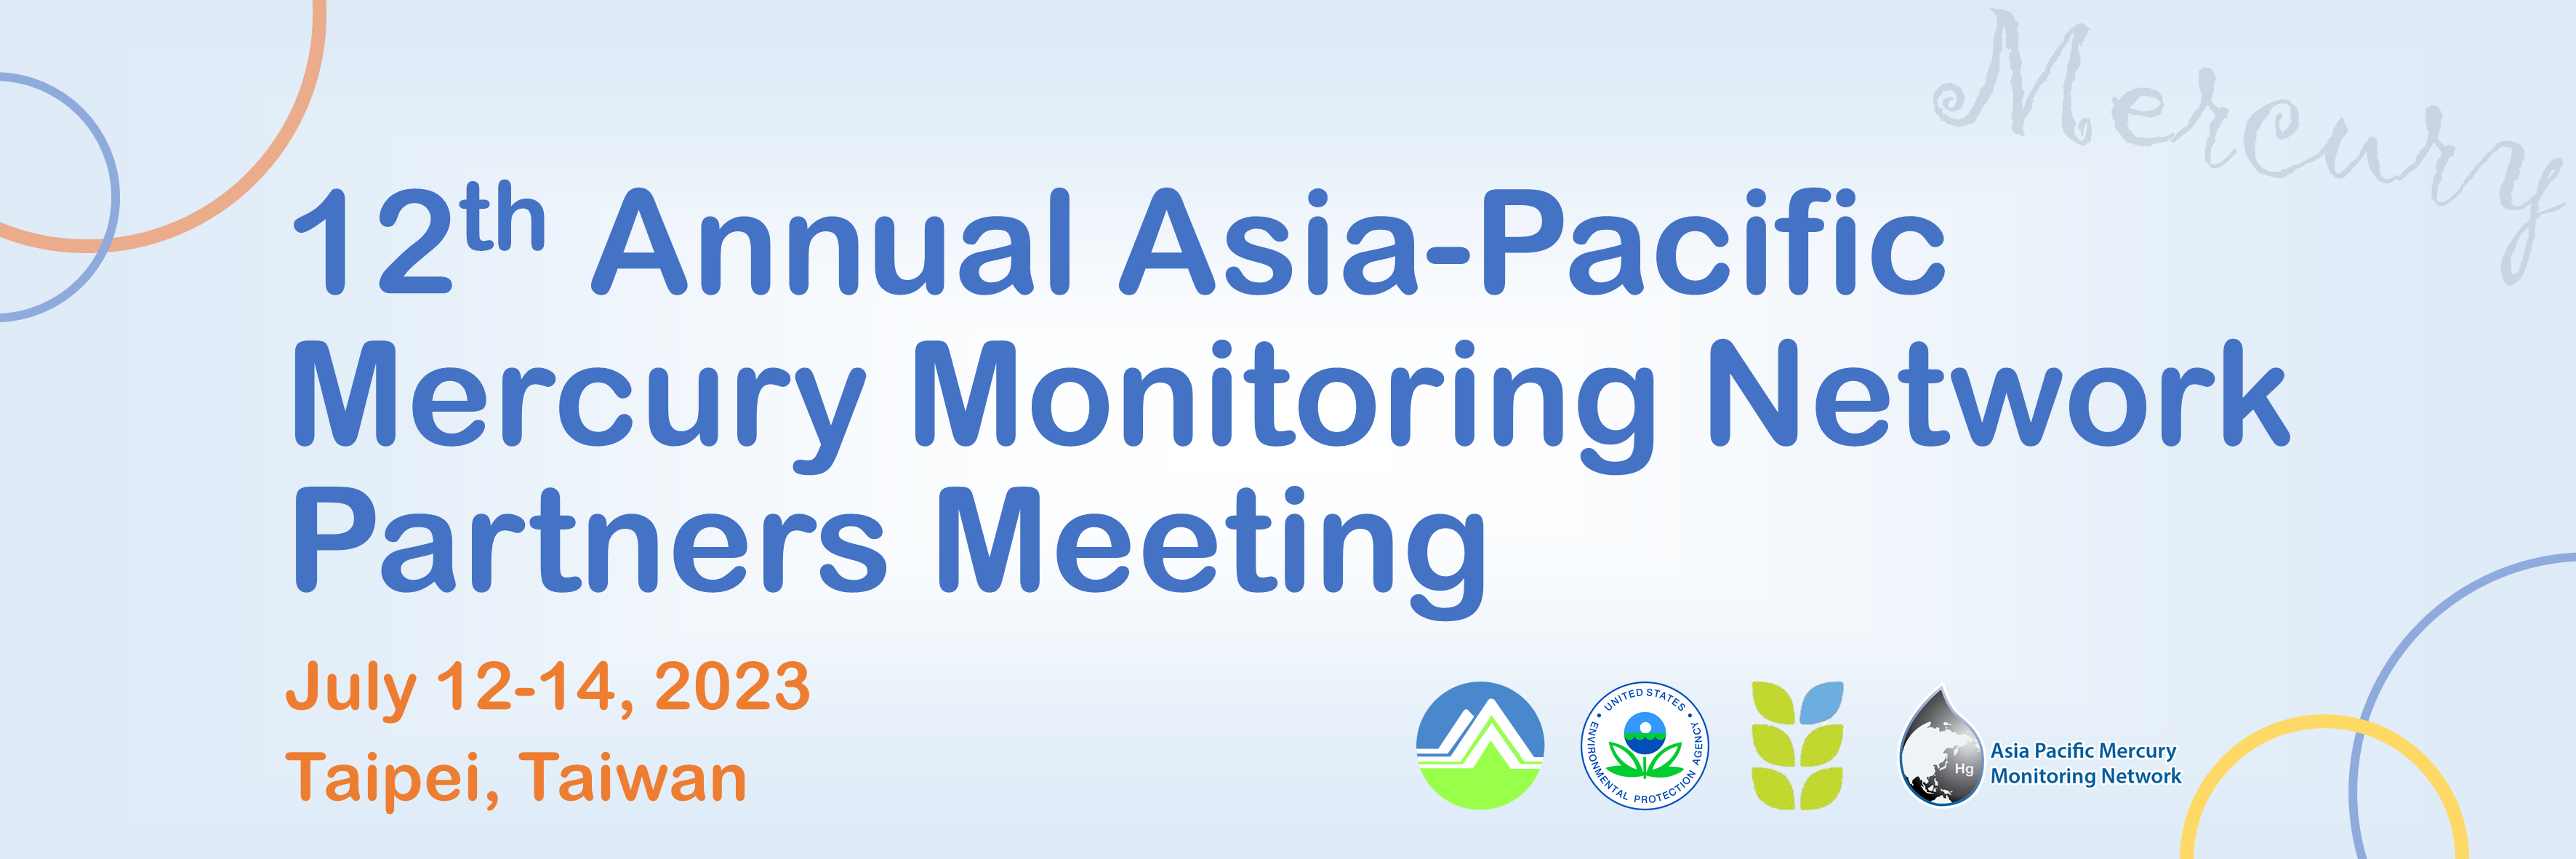 The 12th Annual Asia Pacific Mercury Monitoring Network (APMMN) Partners Meeting